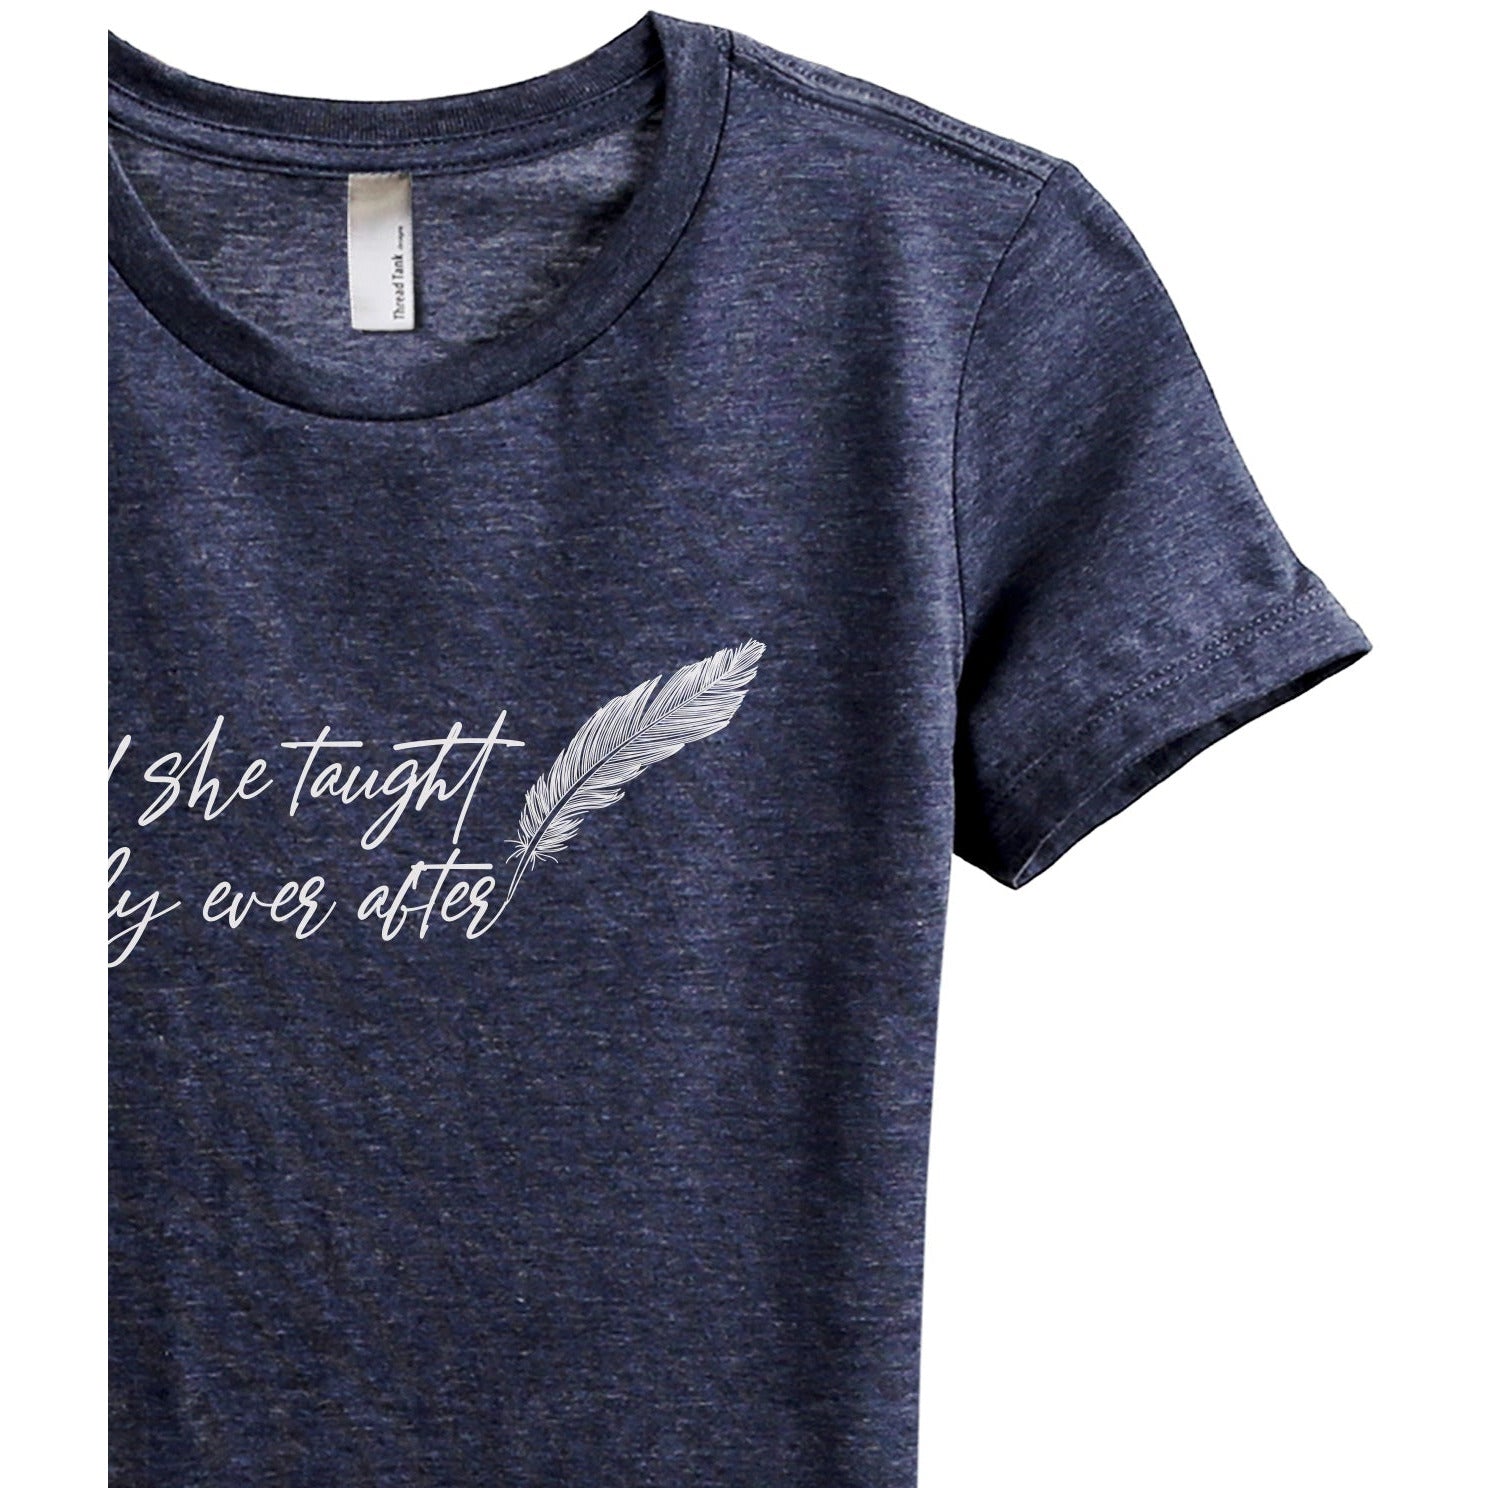 She Taught Happily Ever After - Stories You Can Wear